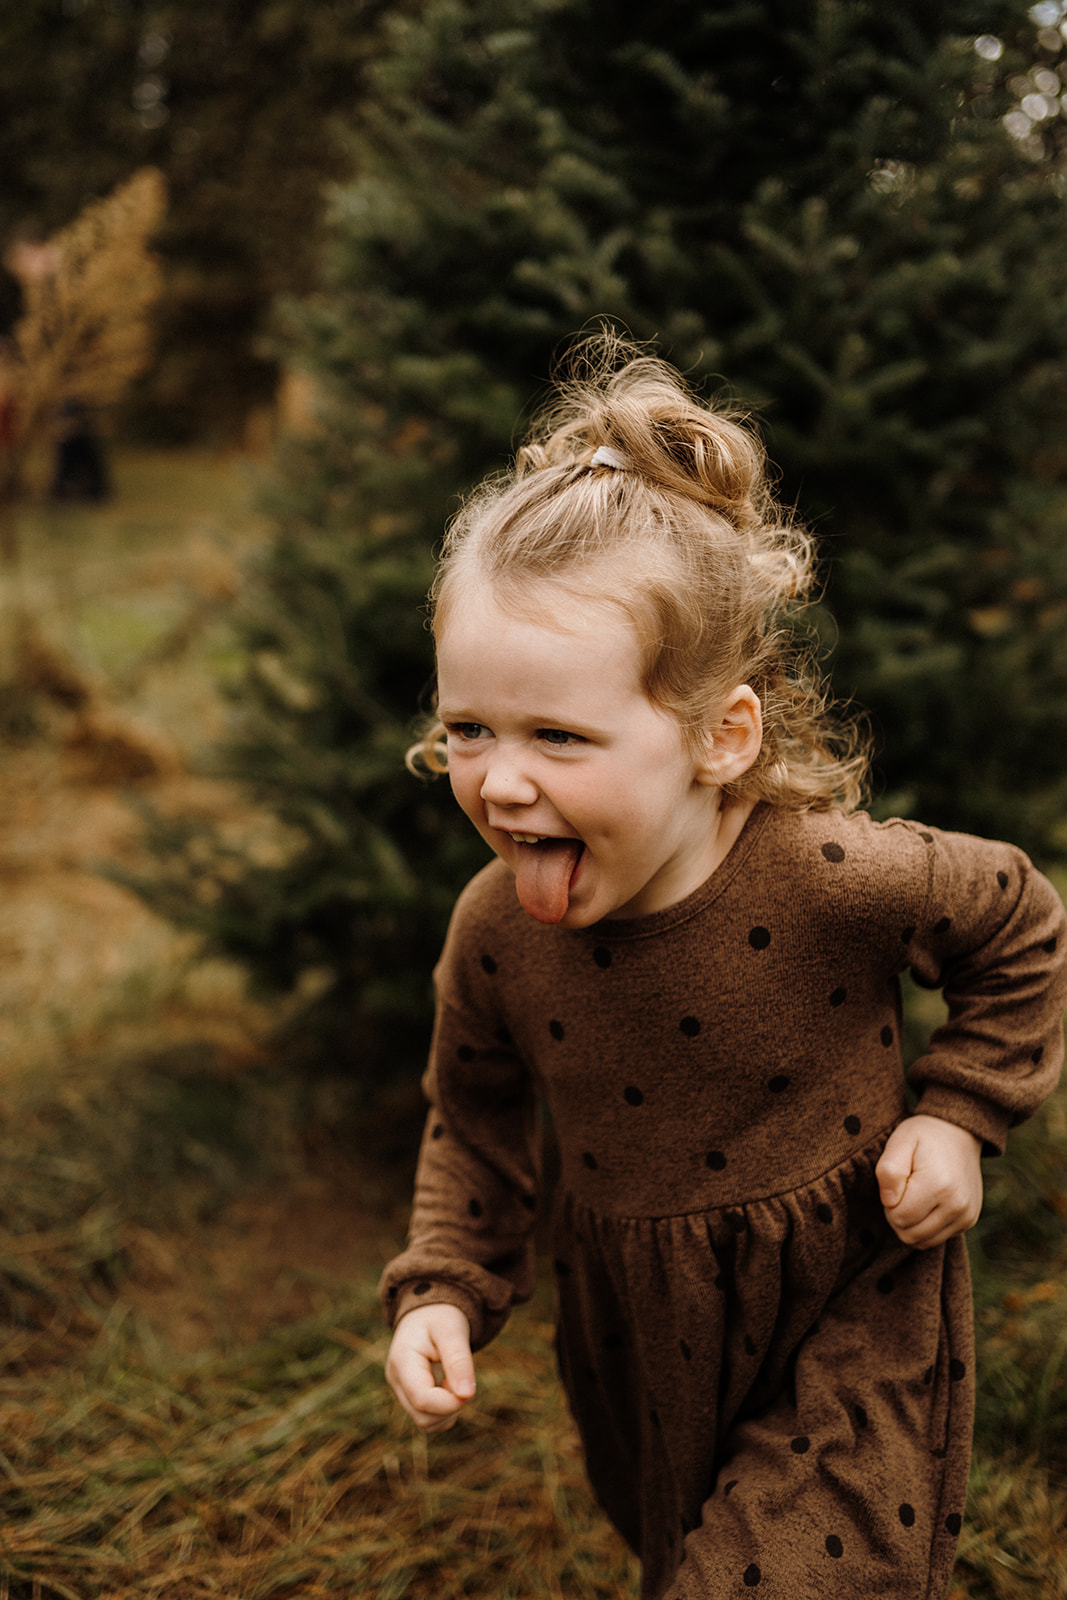 A little girl running outside with her tongue out.